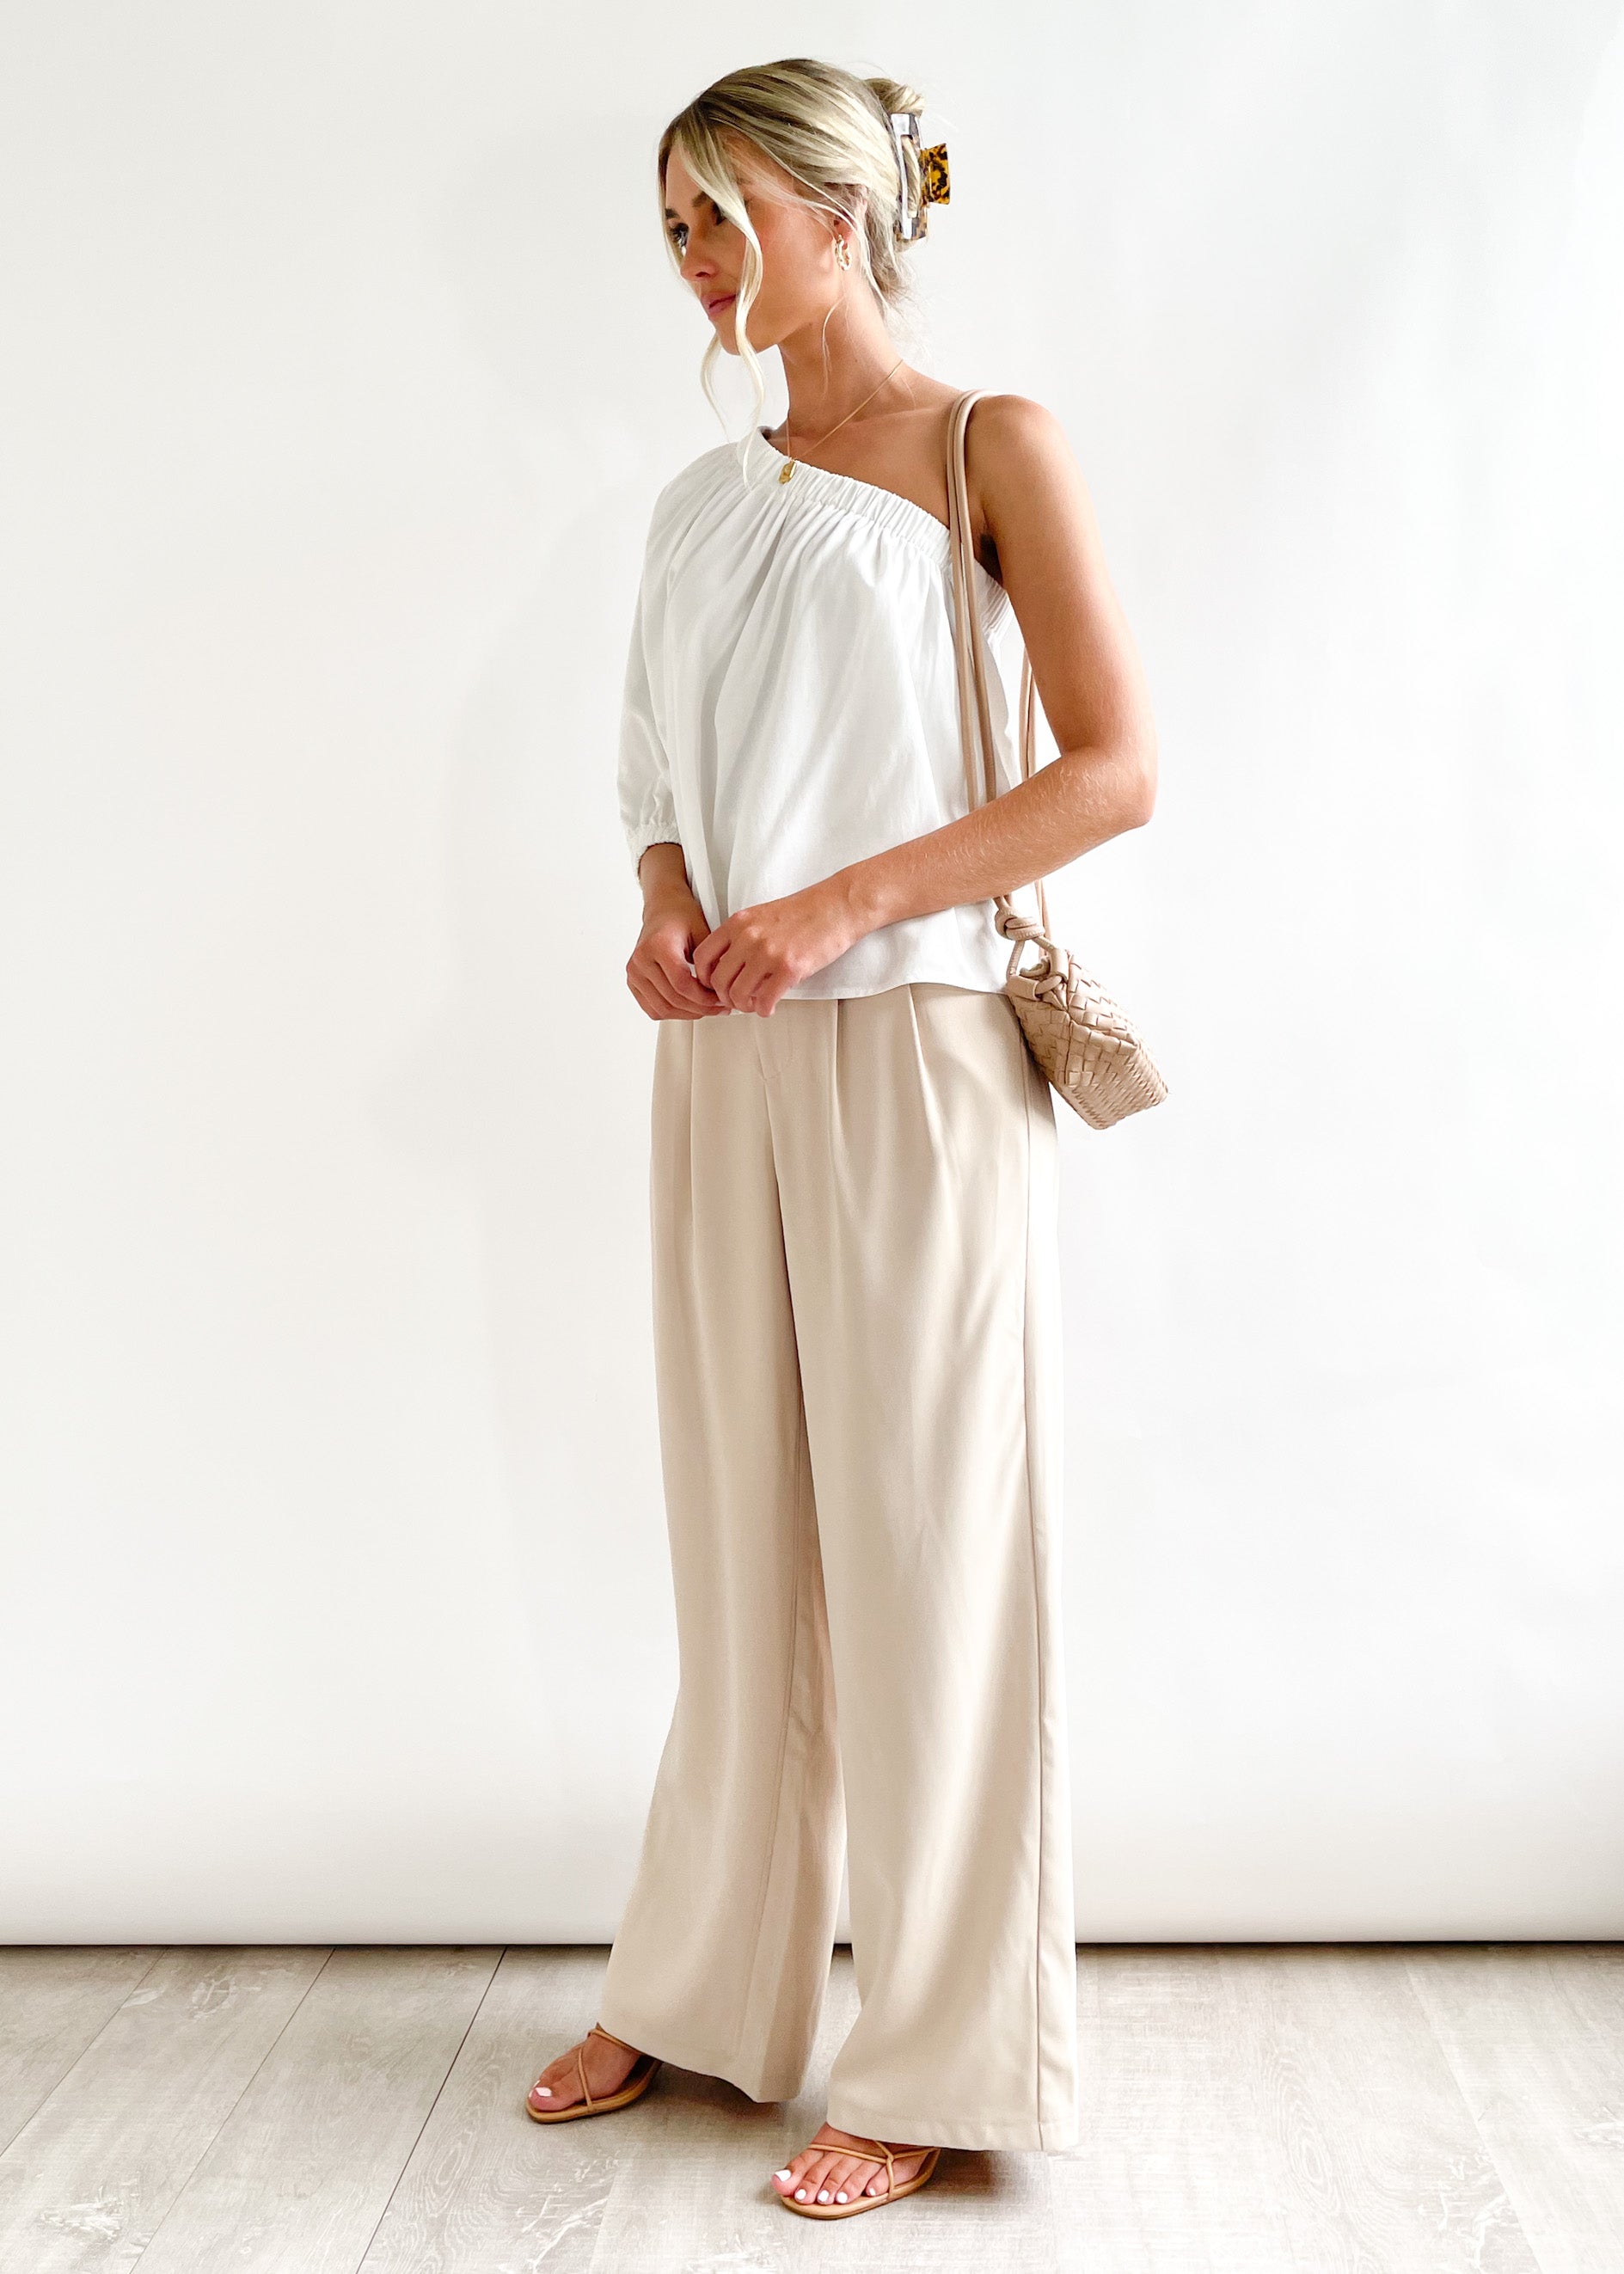 Blakie One Shoulder Top - Off White